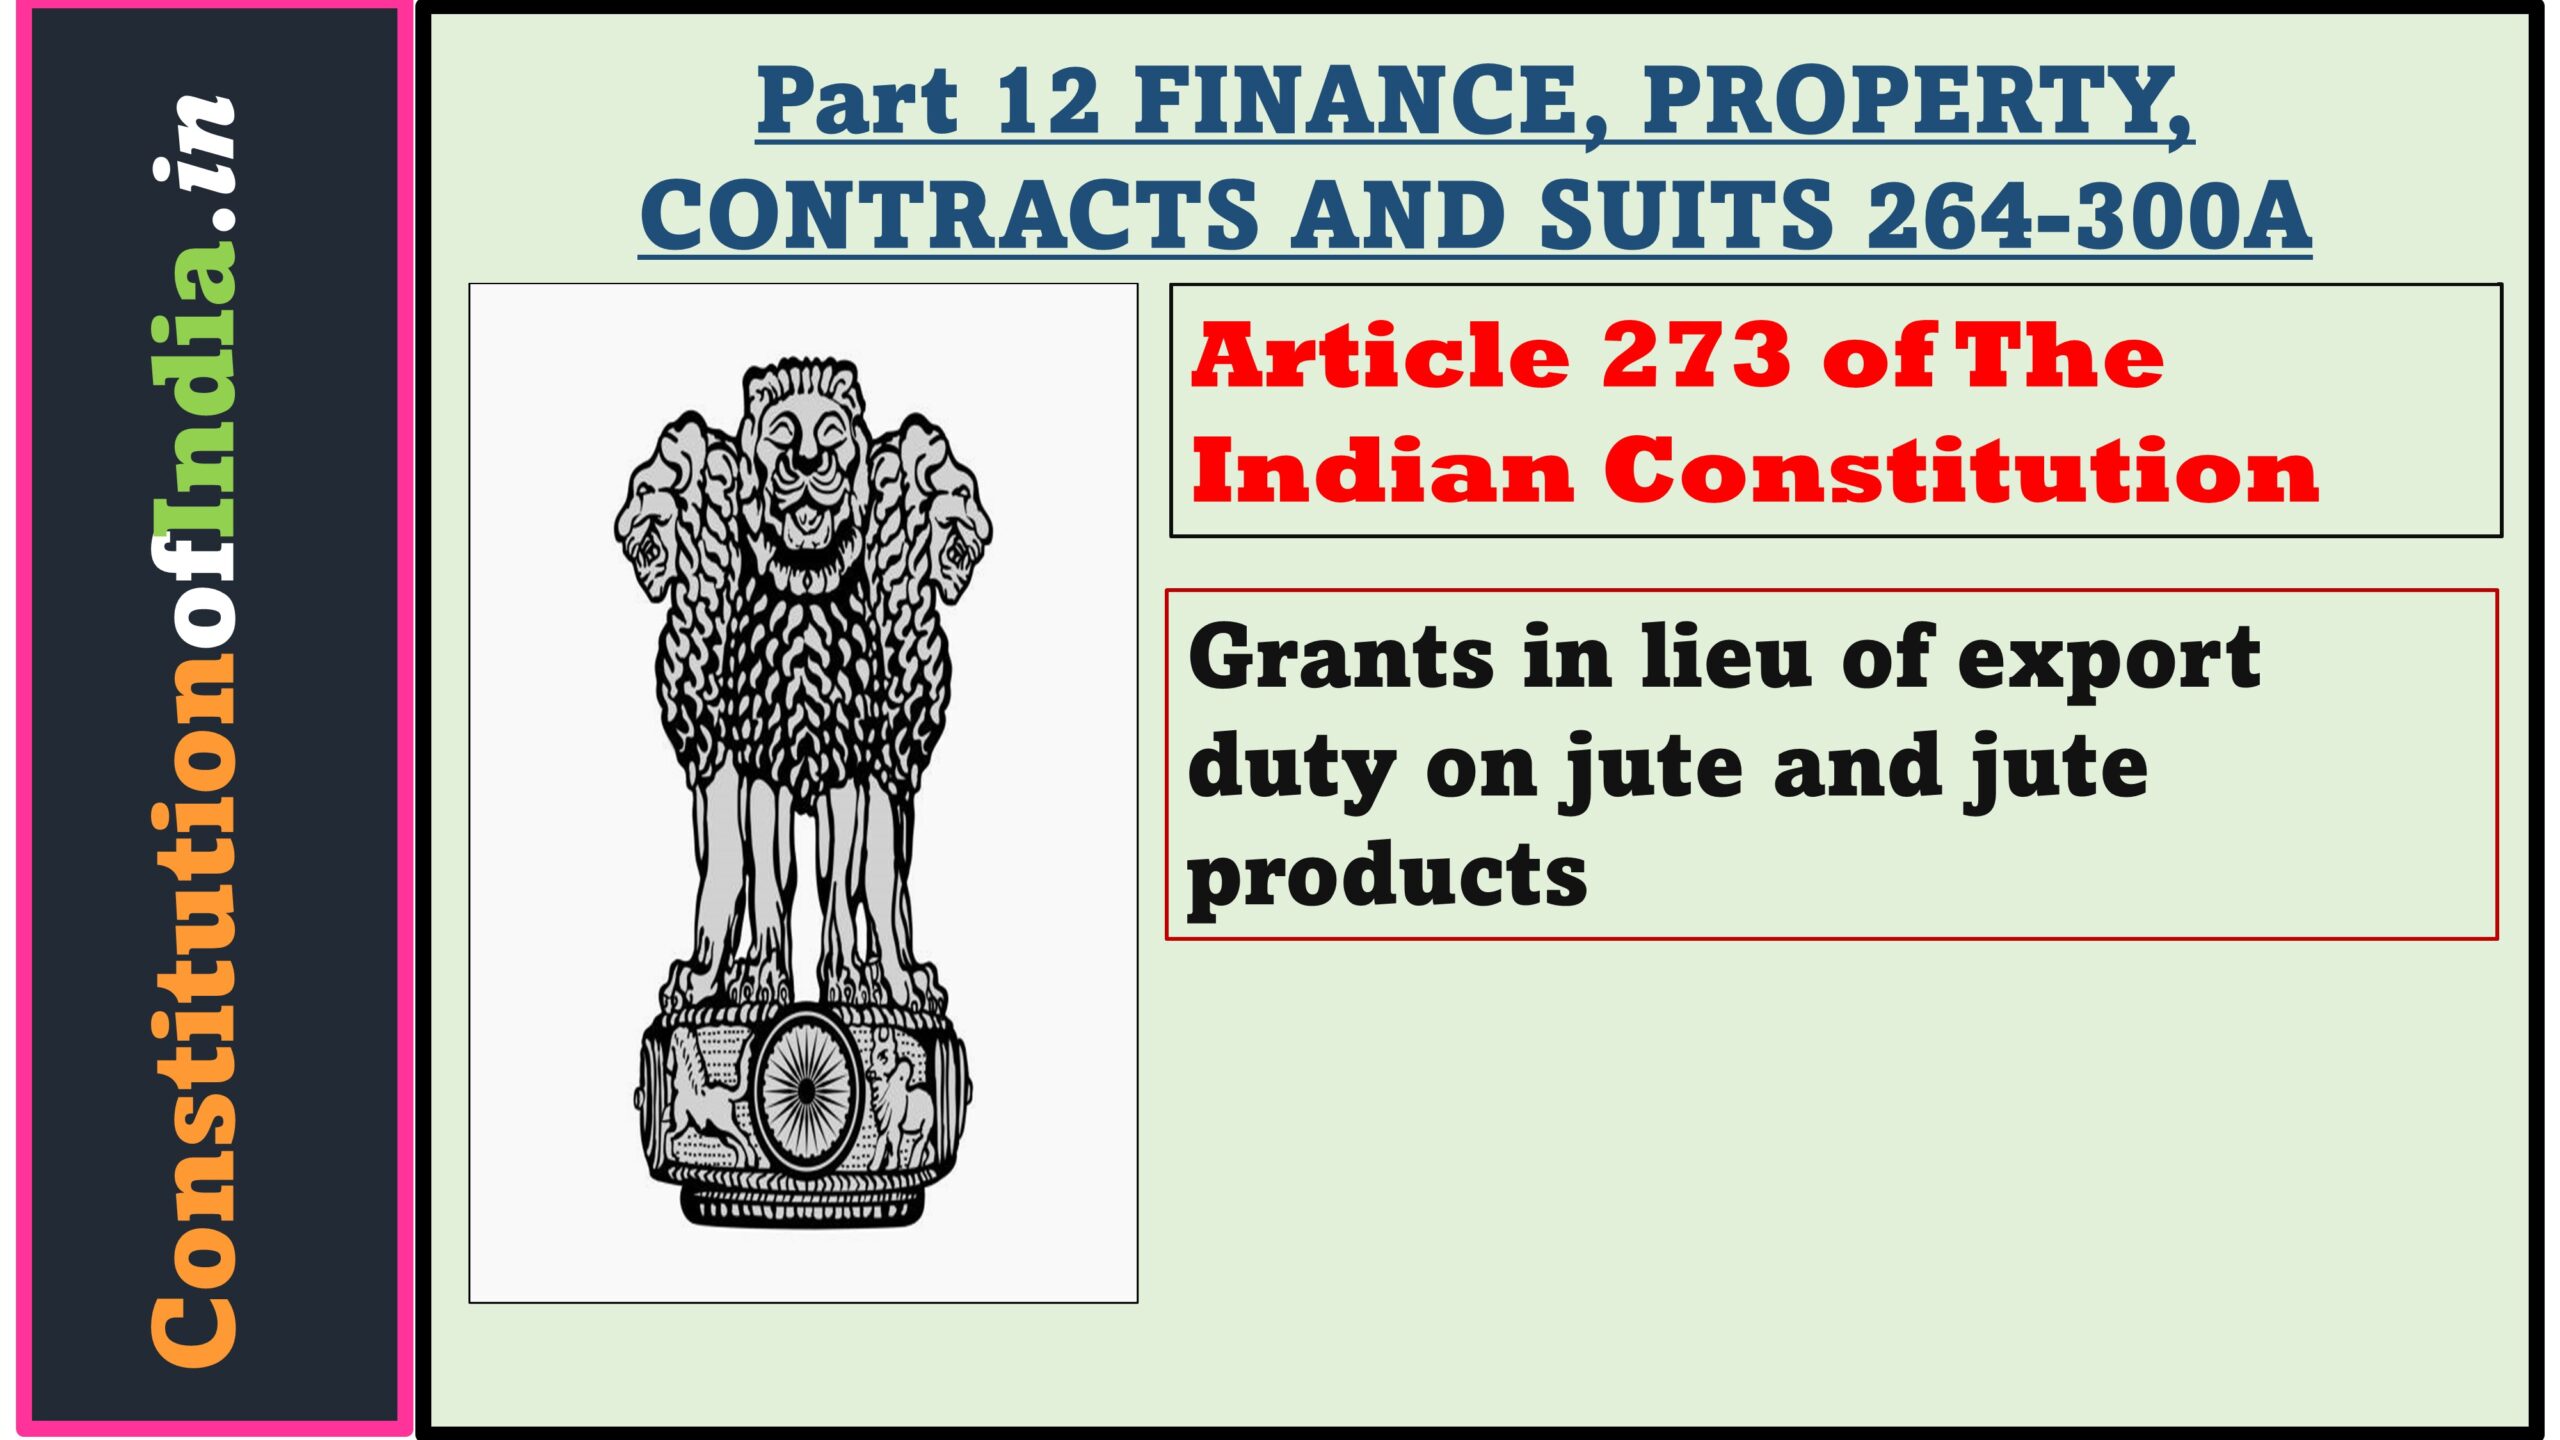 Article 273 of The Indian Constitution